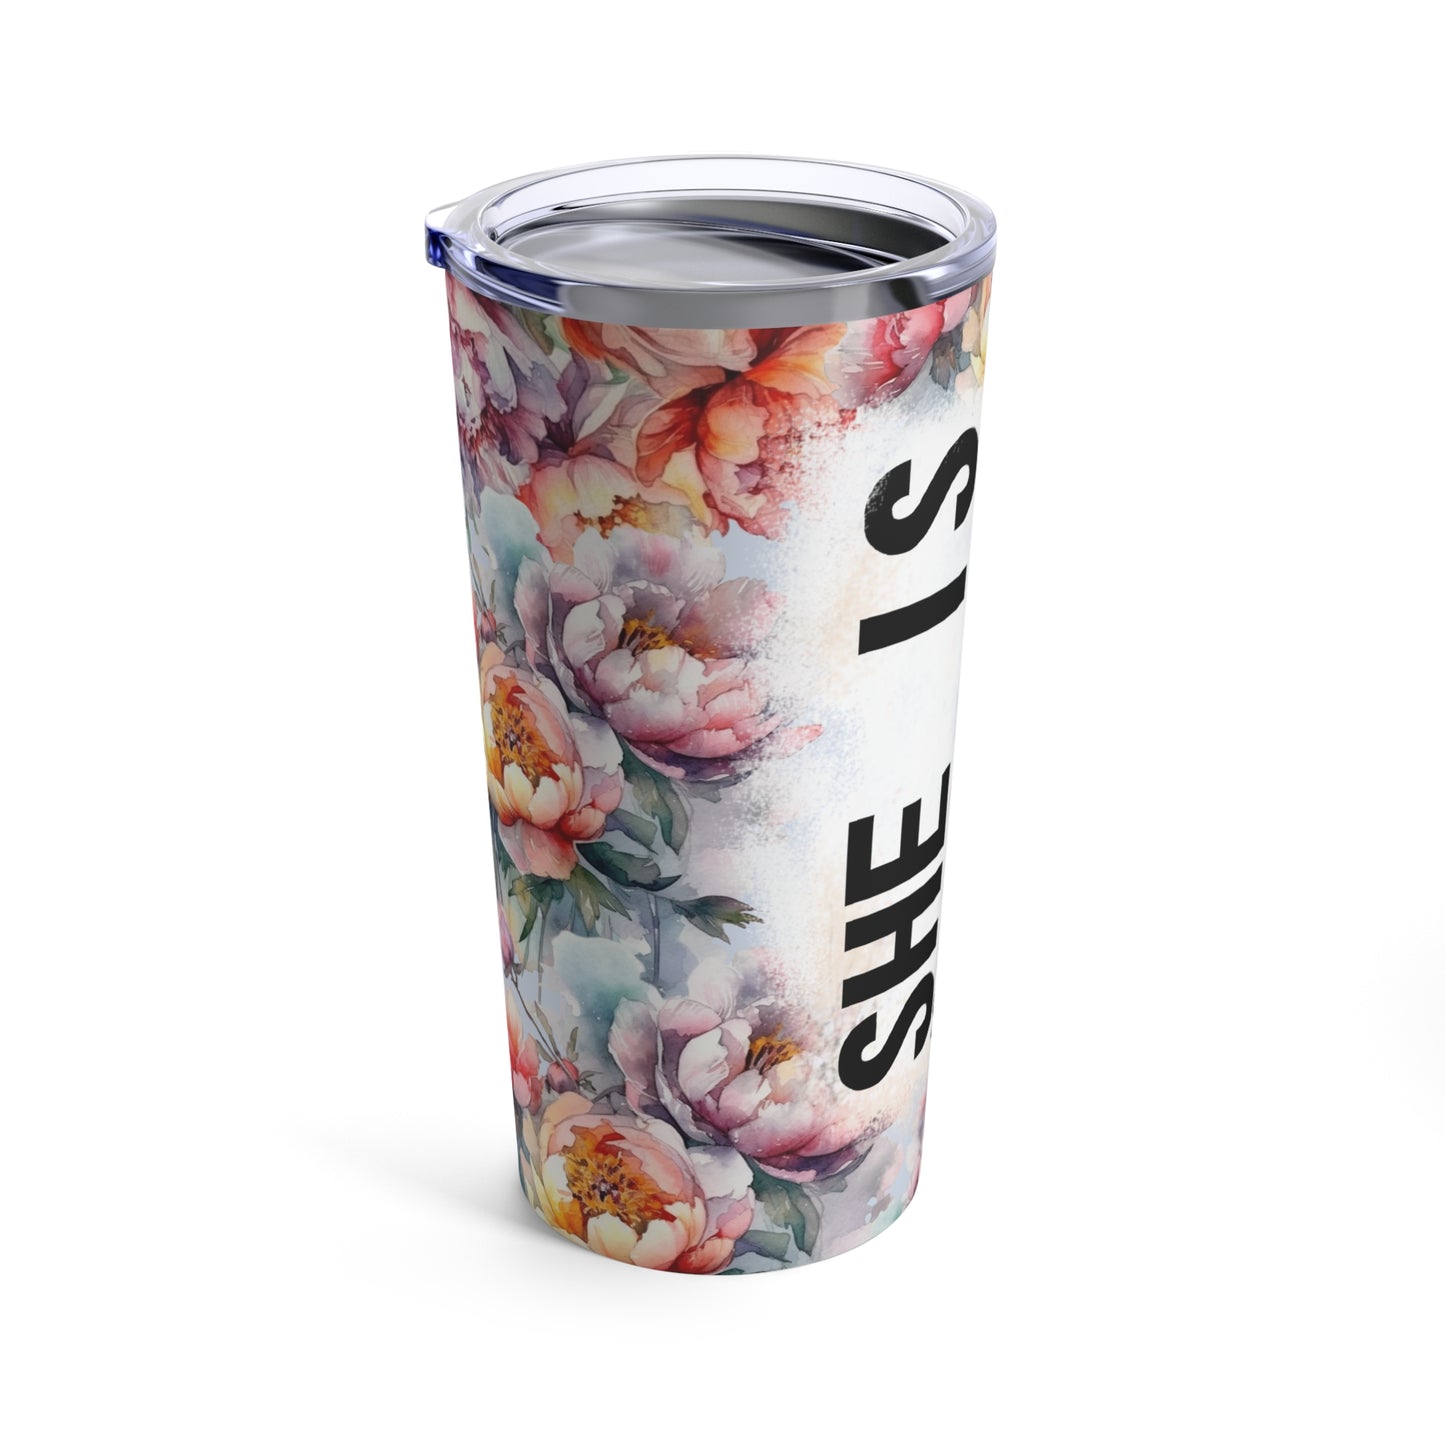 She is design #9, Mother's Day Gift, Wife, Sister, Significant Other, Girlfriend, Grandmother, Gift, Stainless Steel Tumbler 20oz